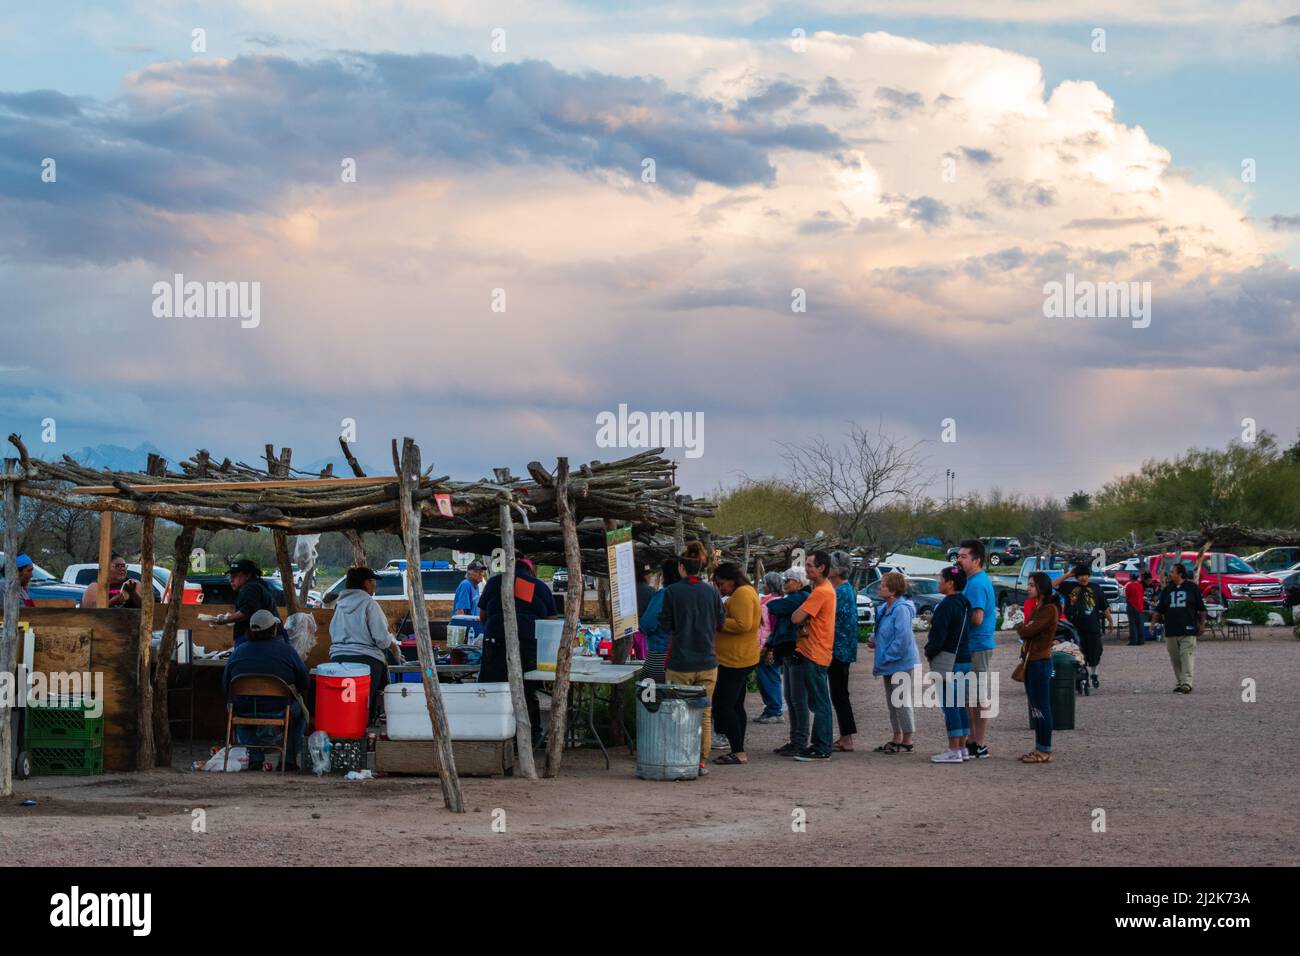 People waiting in line to eat Native American Fry Bread at Mission San Xavier del Bac in Tucson, Arizona, U.S.A. Stock Photo